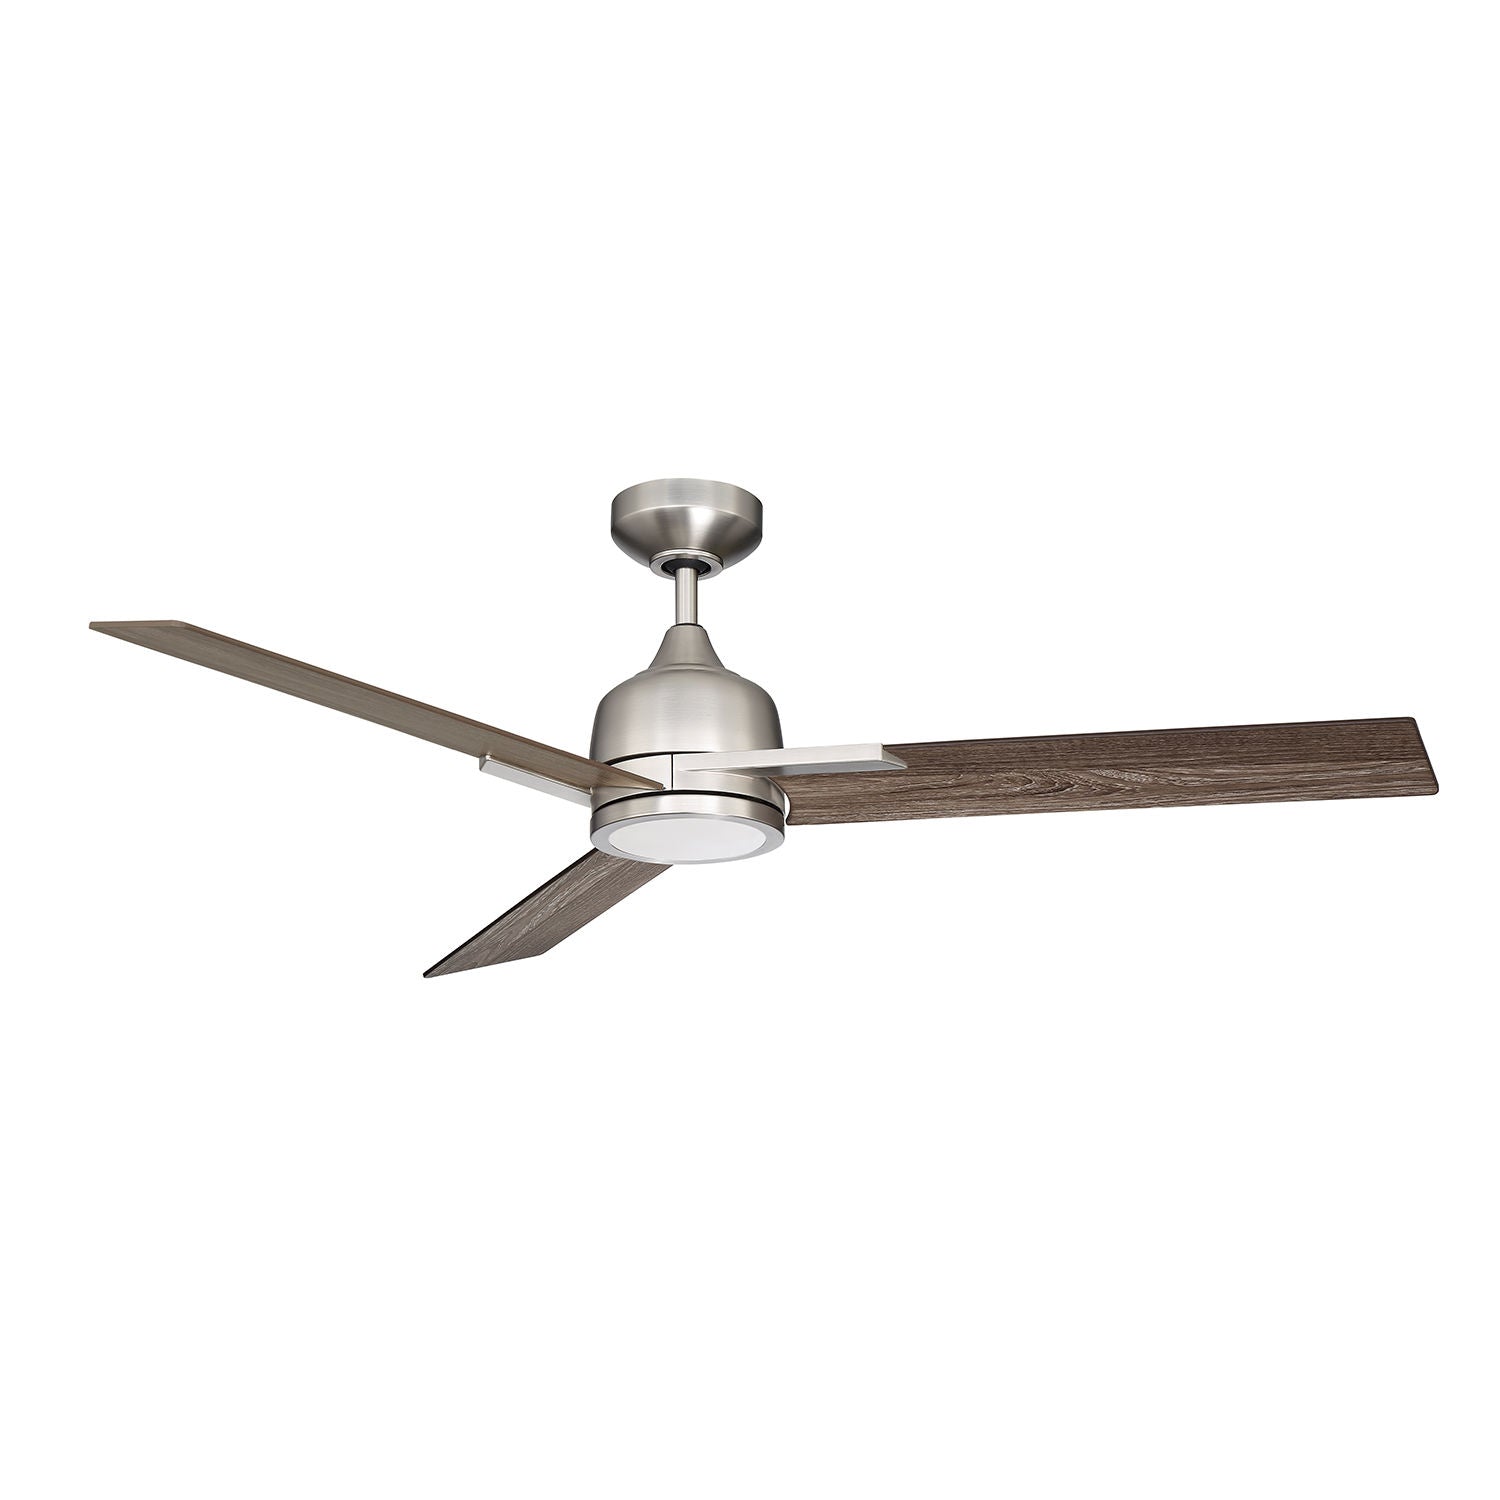 TRITON Ceiling fan Stainless steel INTEGRATED LED - AC22452-SN | KENDAL